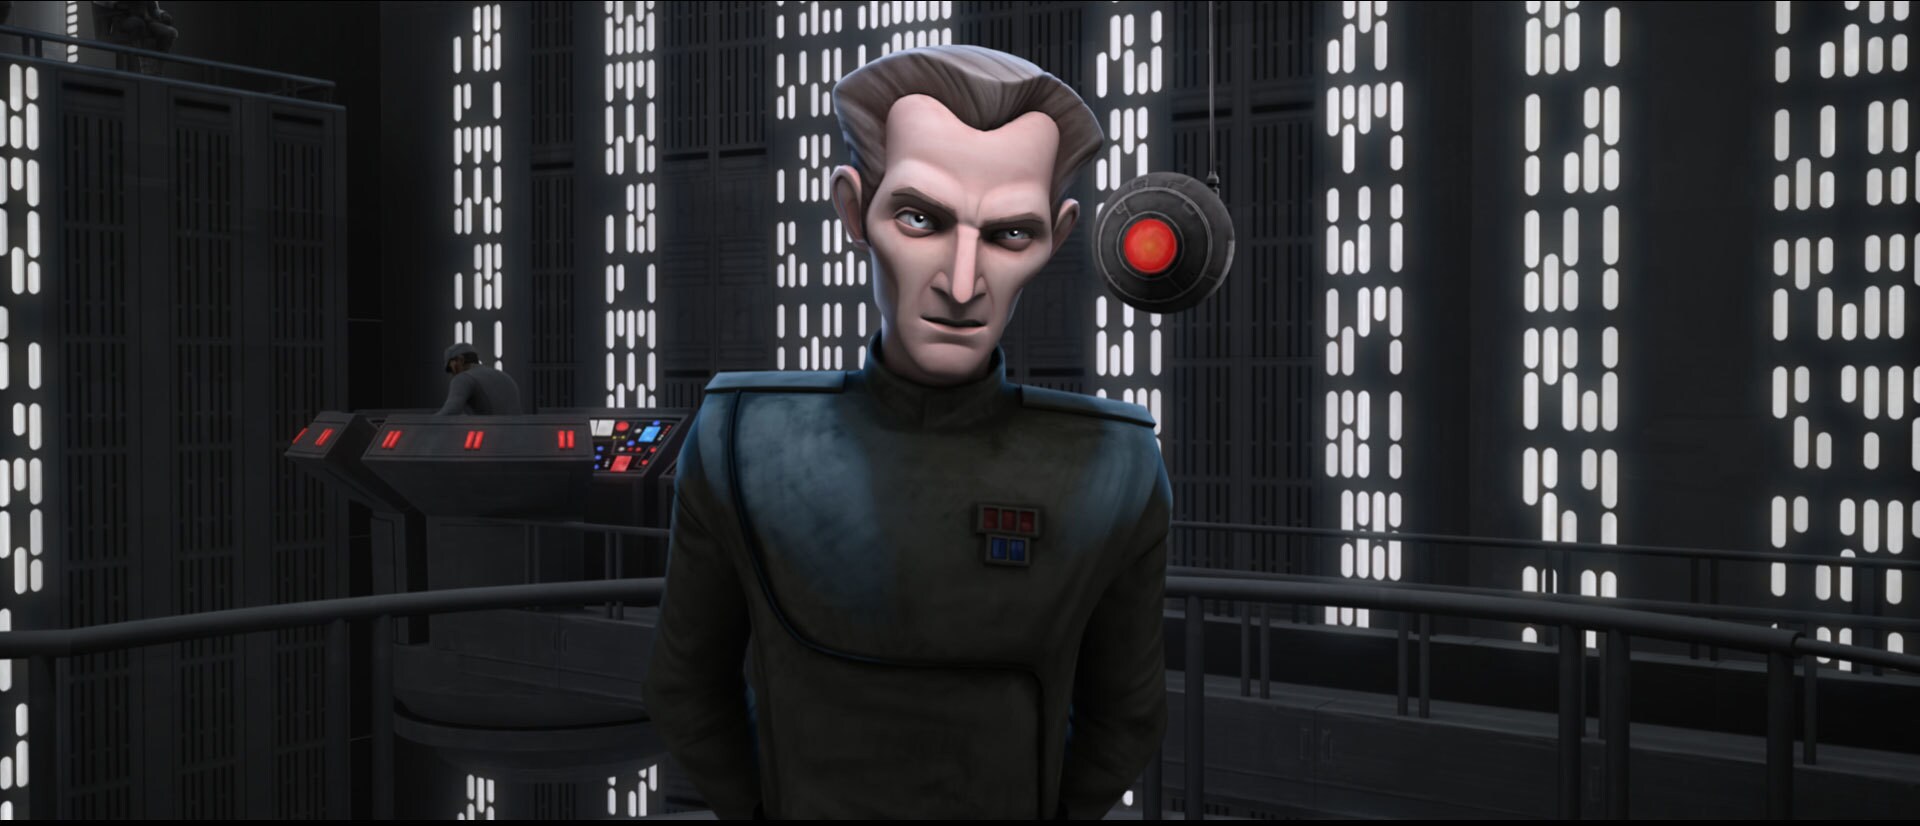 The Jedi reluctantly bowed to Tarkin’s wishes, expelling Ahsoka. Tarkin served as prosecutor at h...